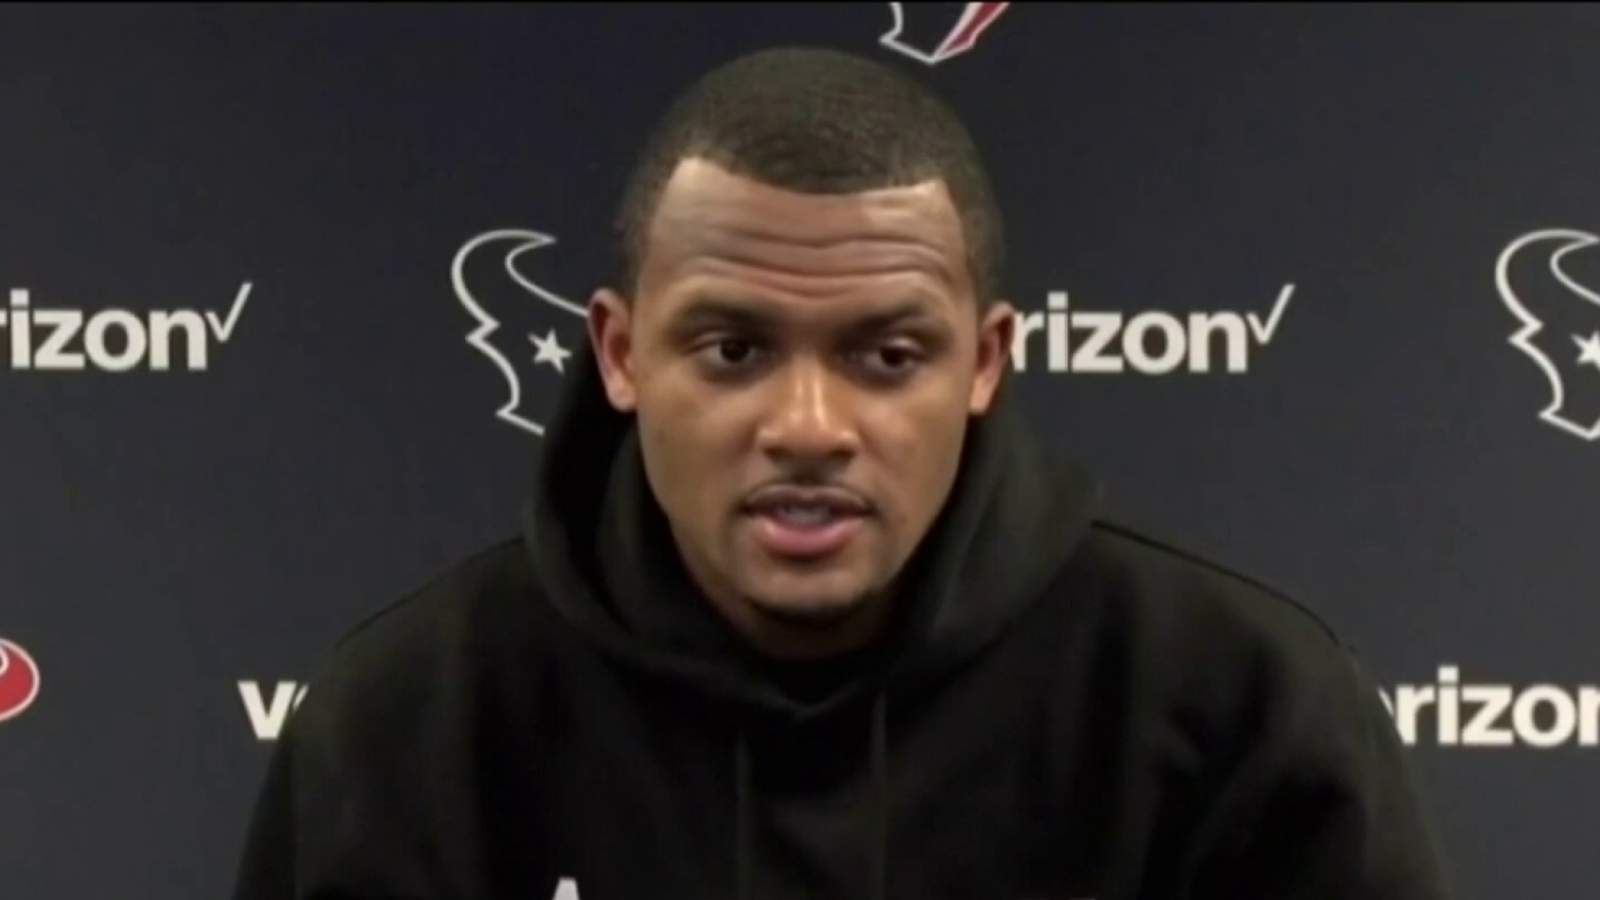 Nike suspends Deshaun Watson endorsement over sexual misconduct allegations, report says